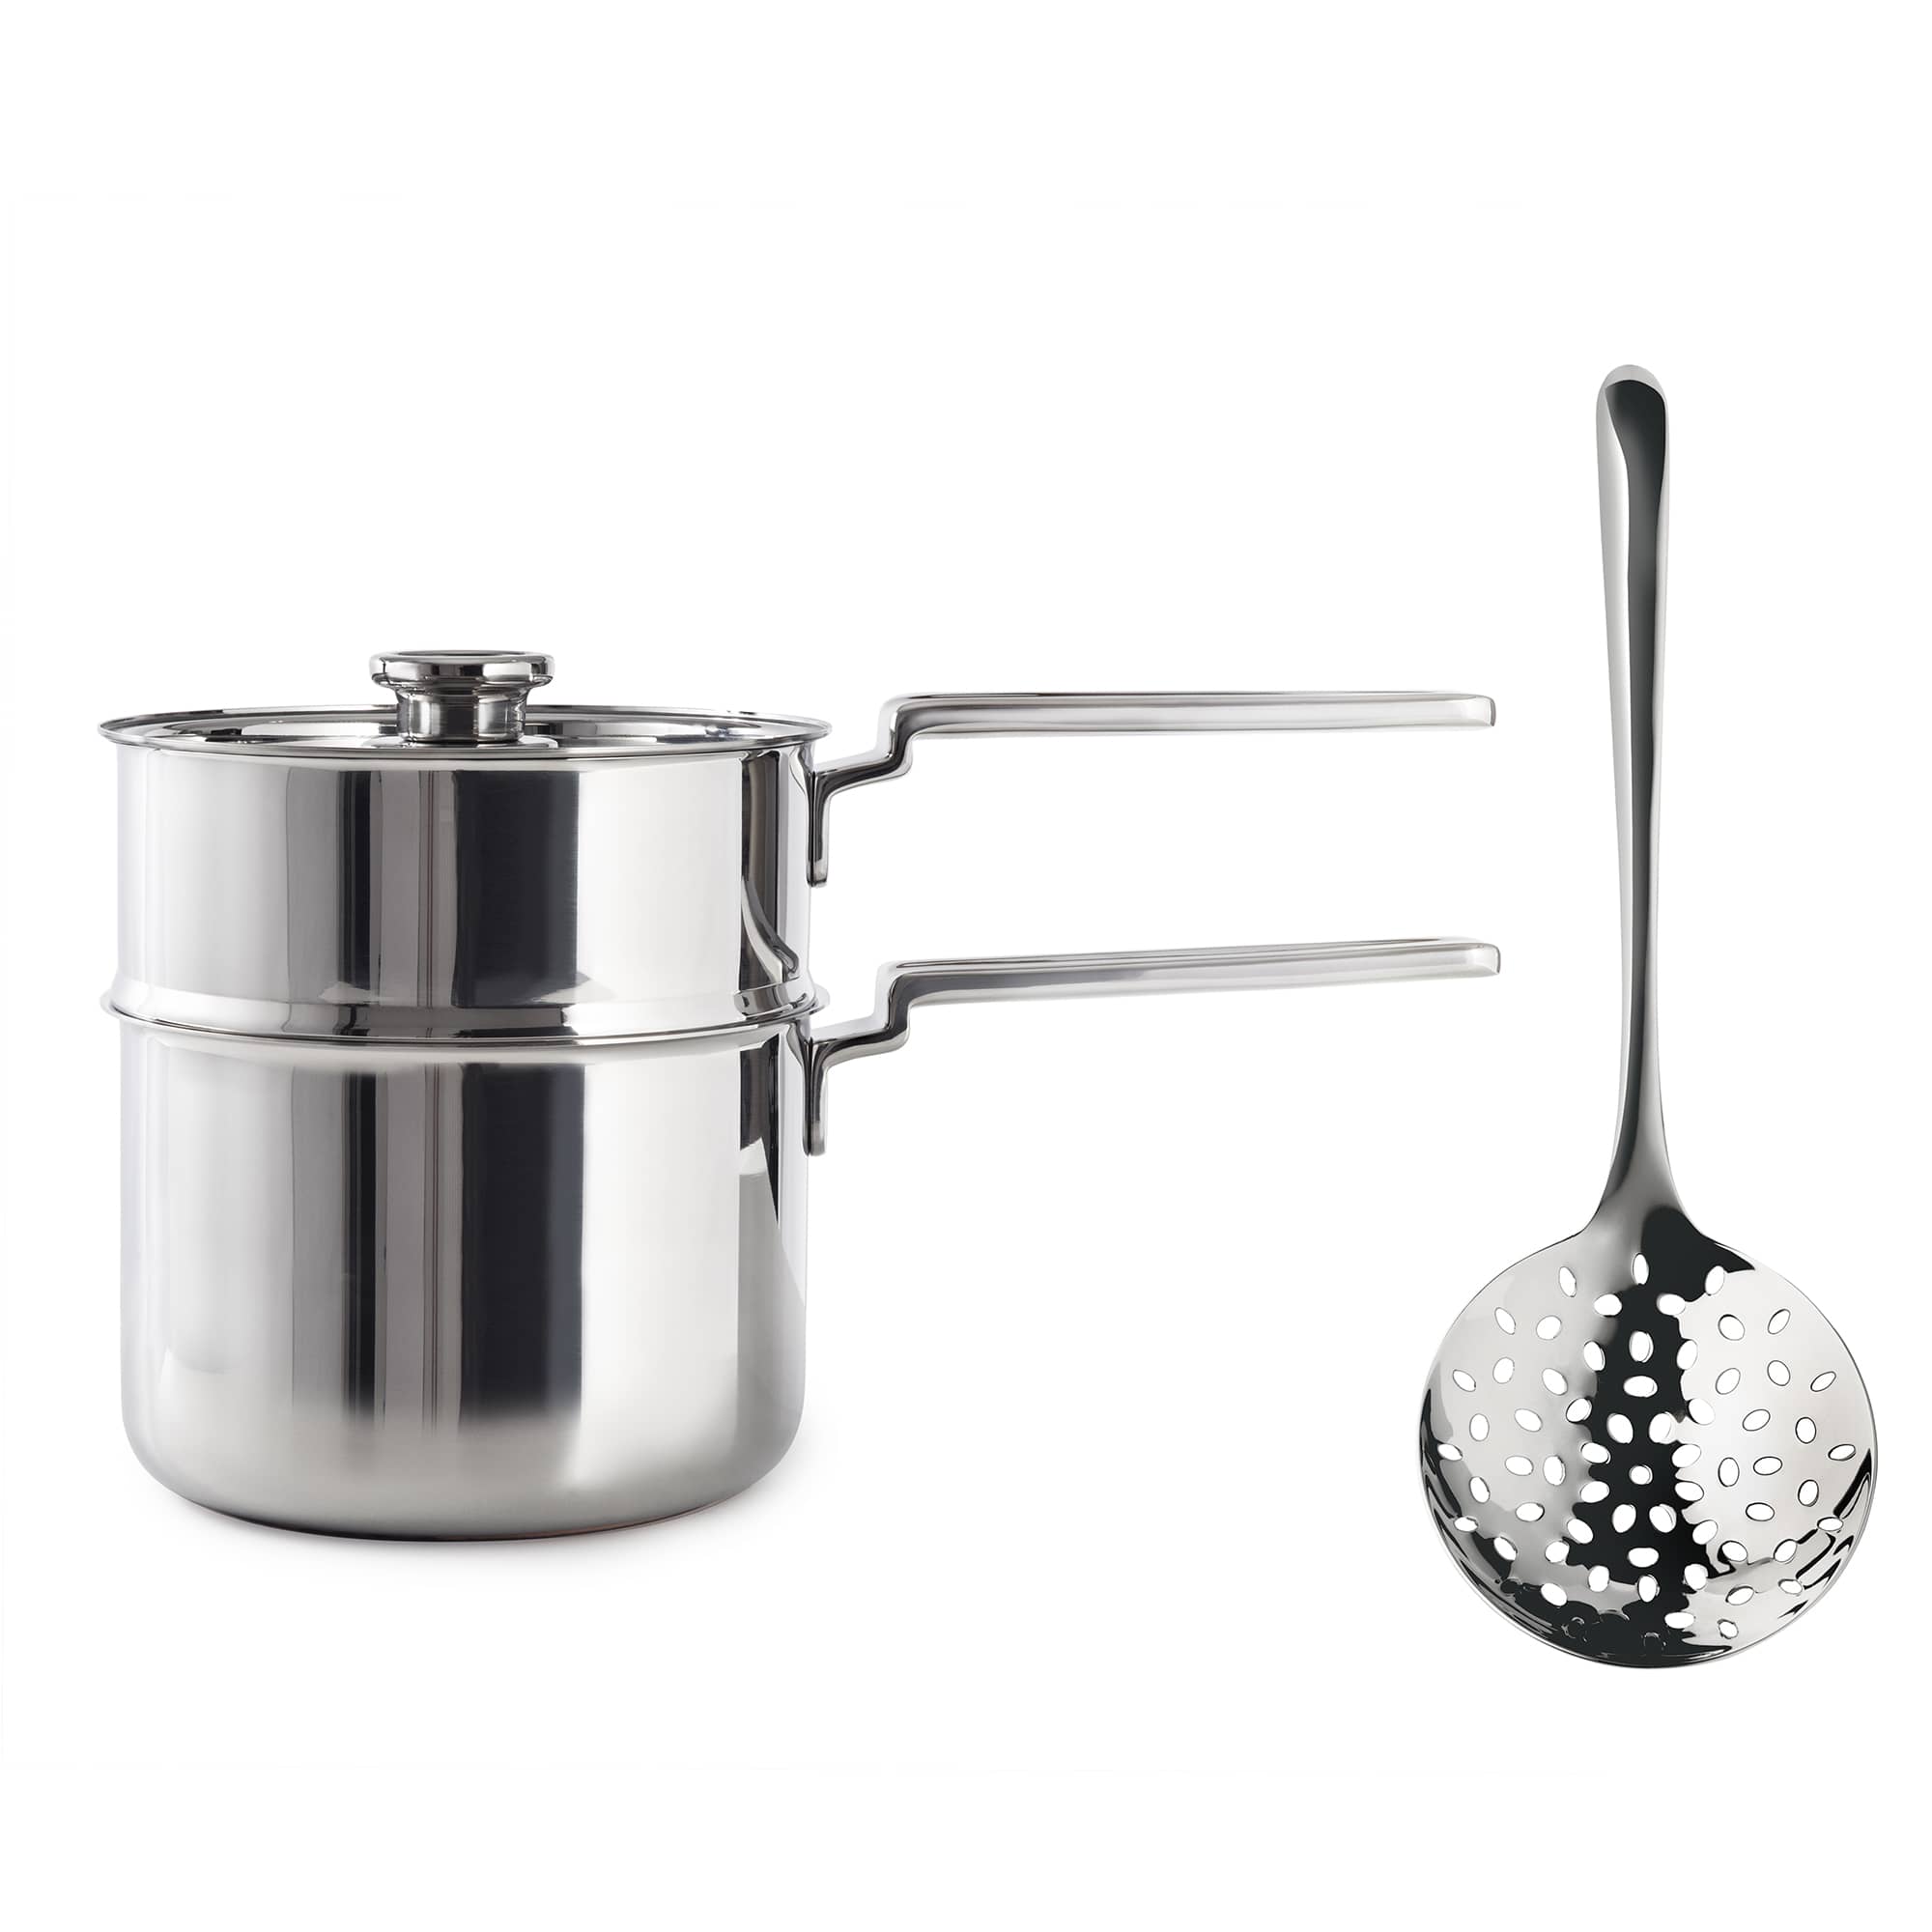 Campden Saucepan 3.2L & Steamer Set with Signature Slotted Drainer/Skimmer, Cookware